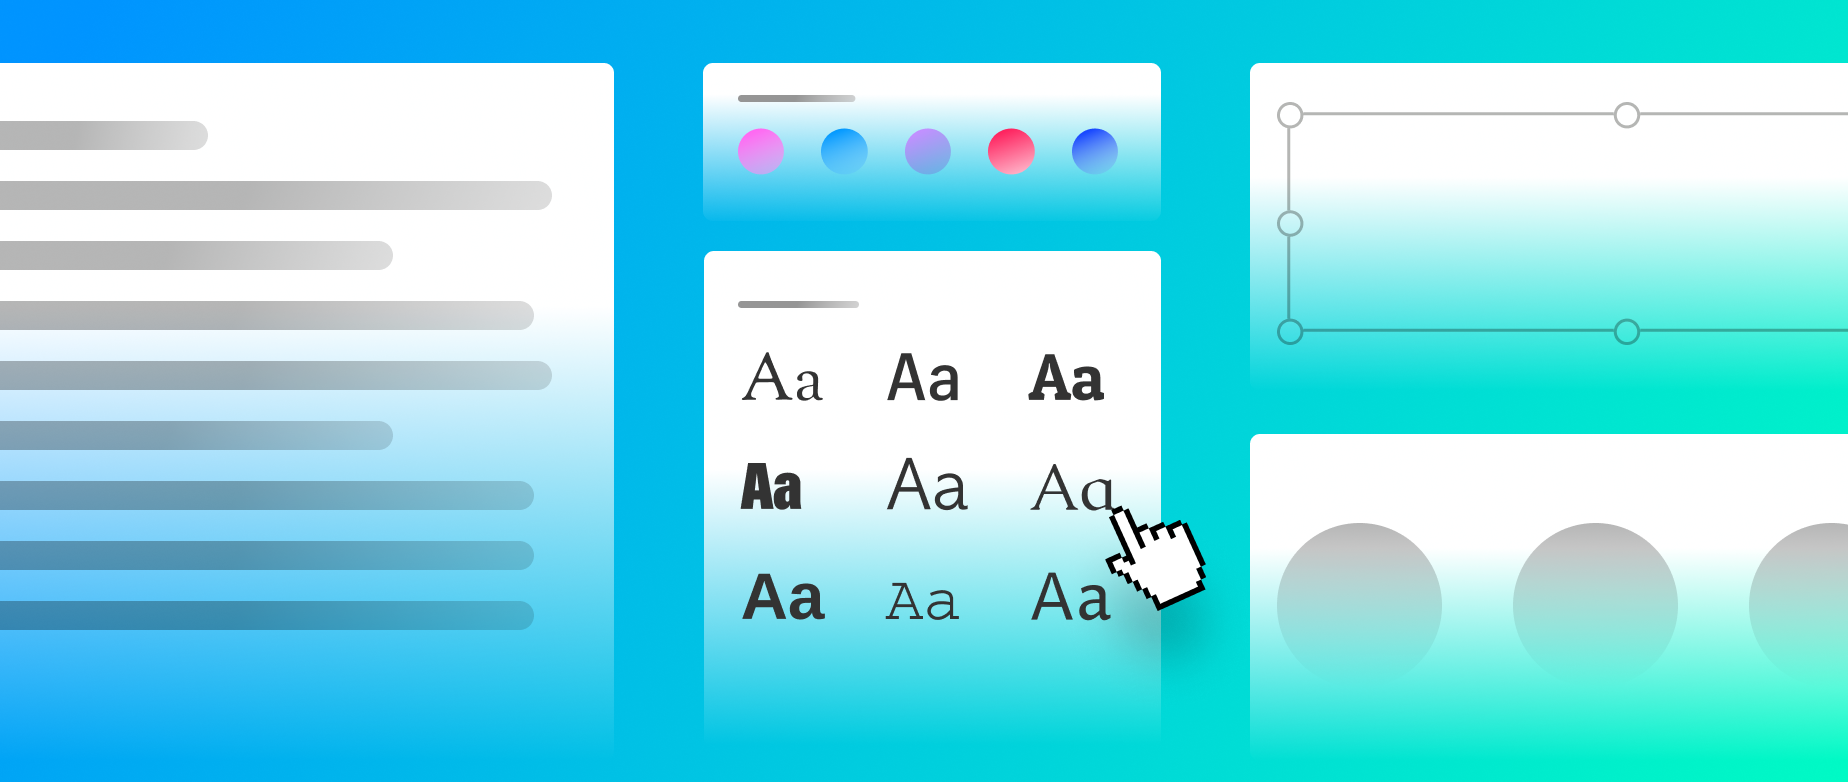 Icons and templates representing brand guidelines including fonts and color palettes